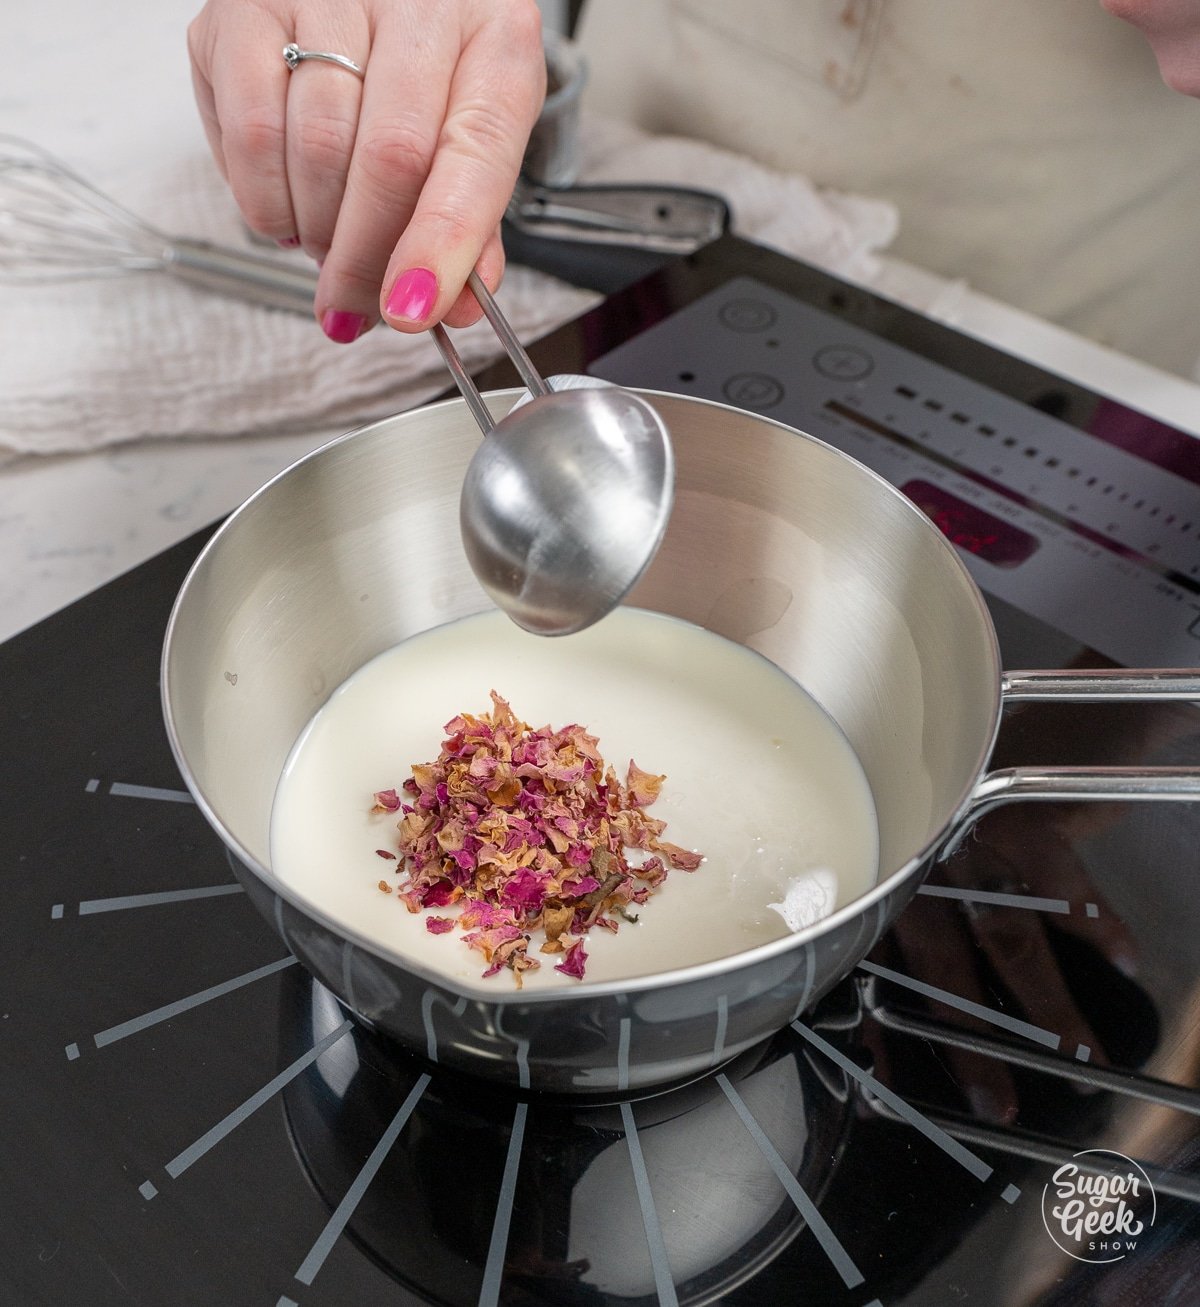 hand adding a tablespoon of rose petals to a saucepan of cream